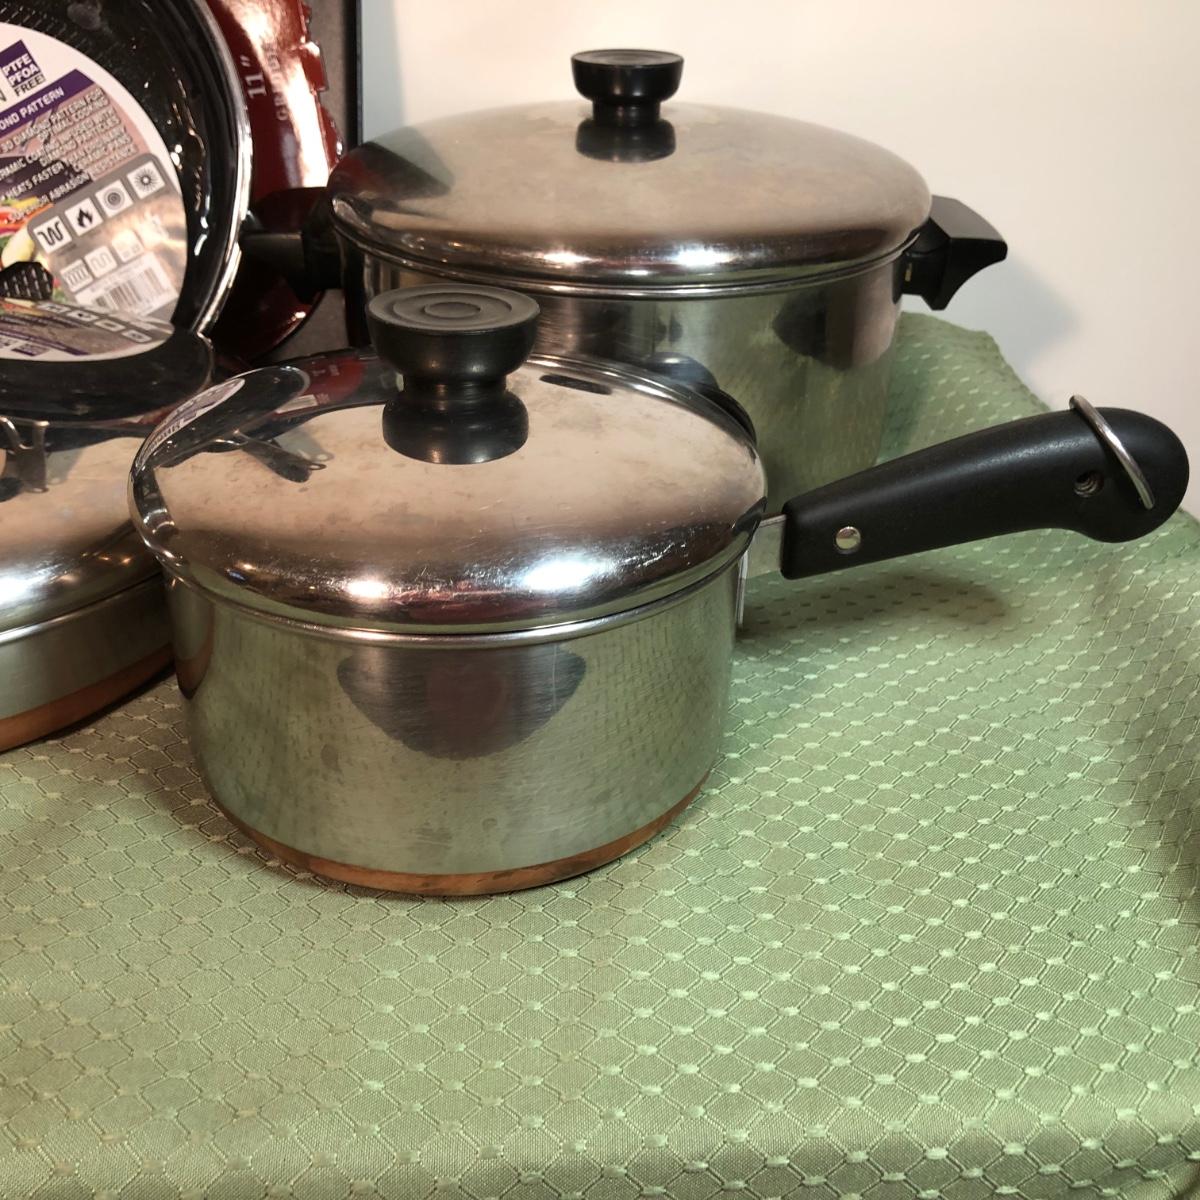 Sold at Auction: Pre-Owned Revere Ware Pots / Pans and More